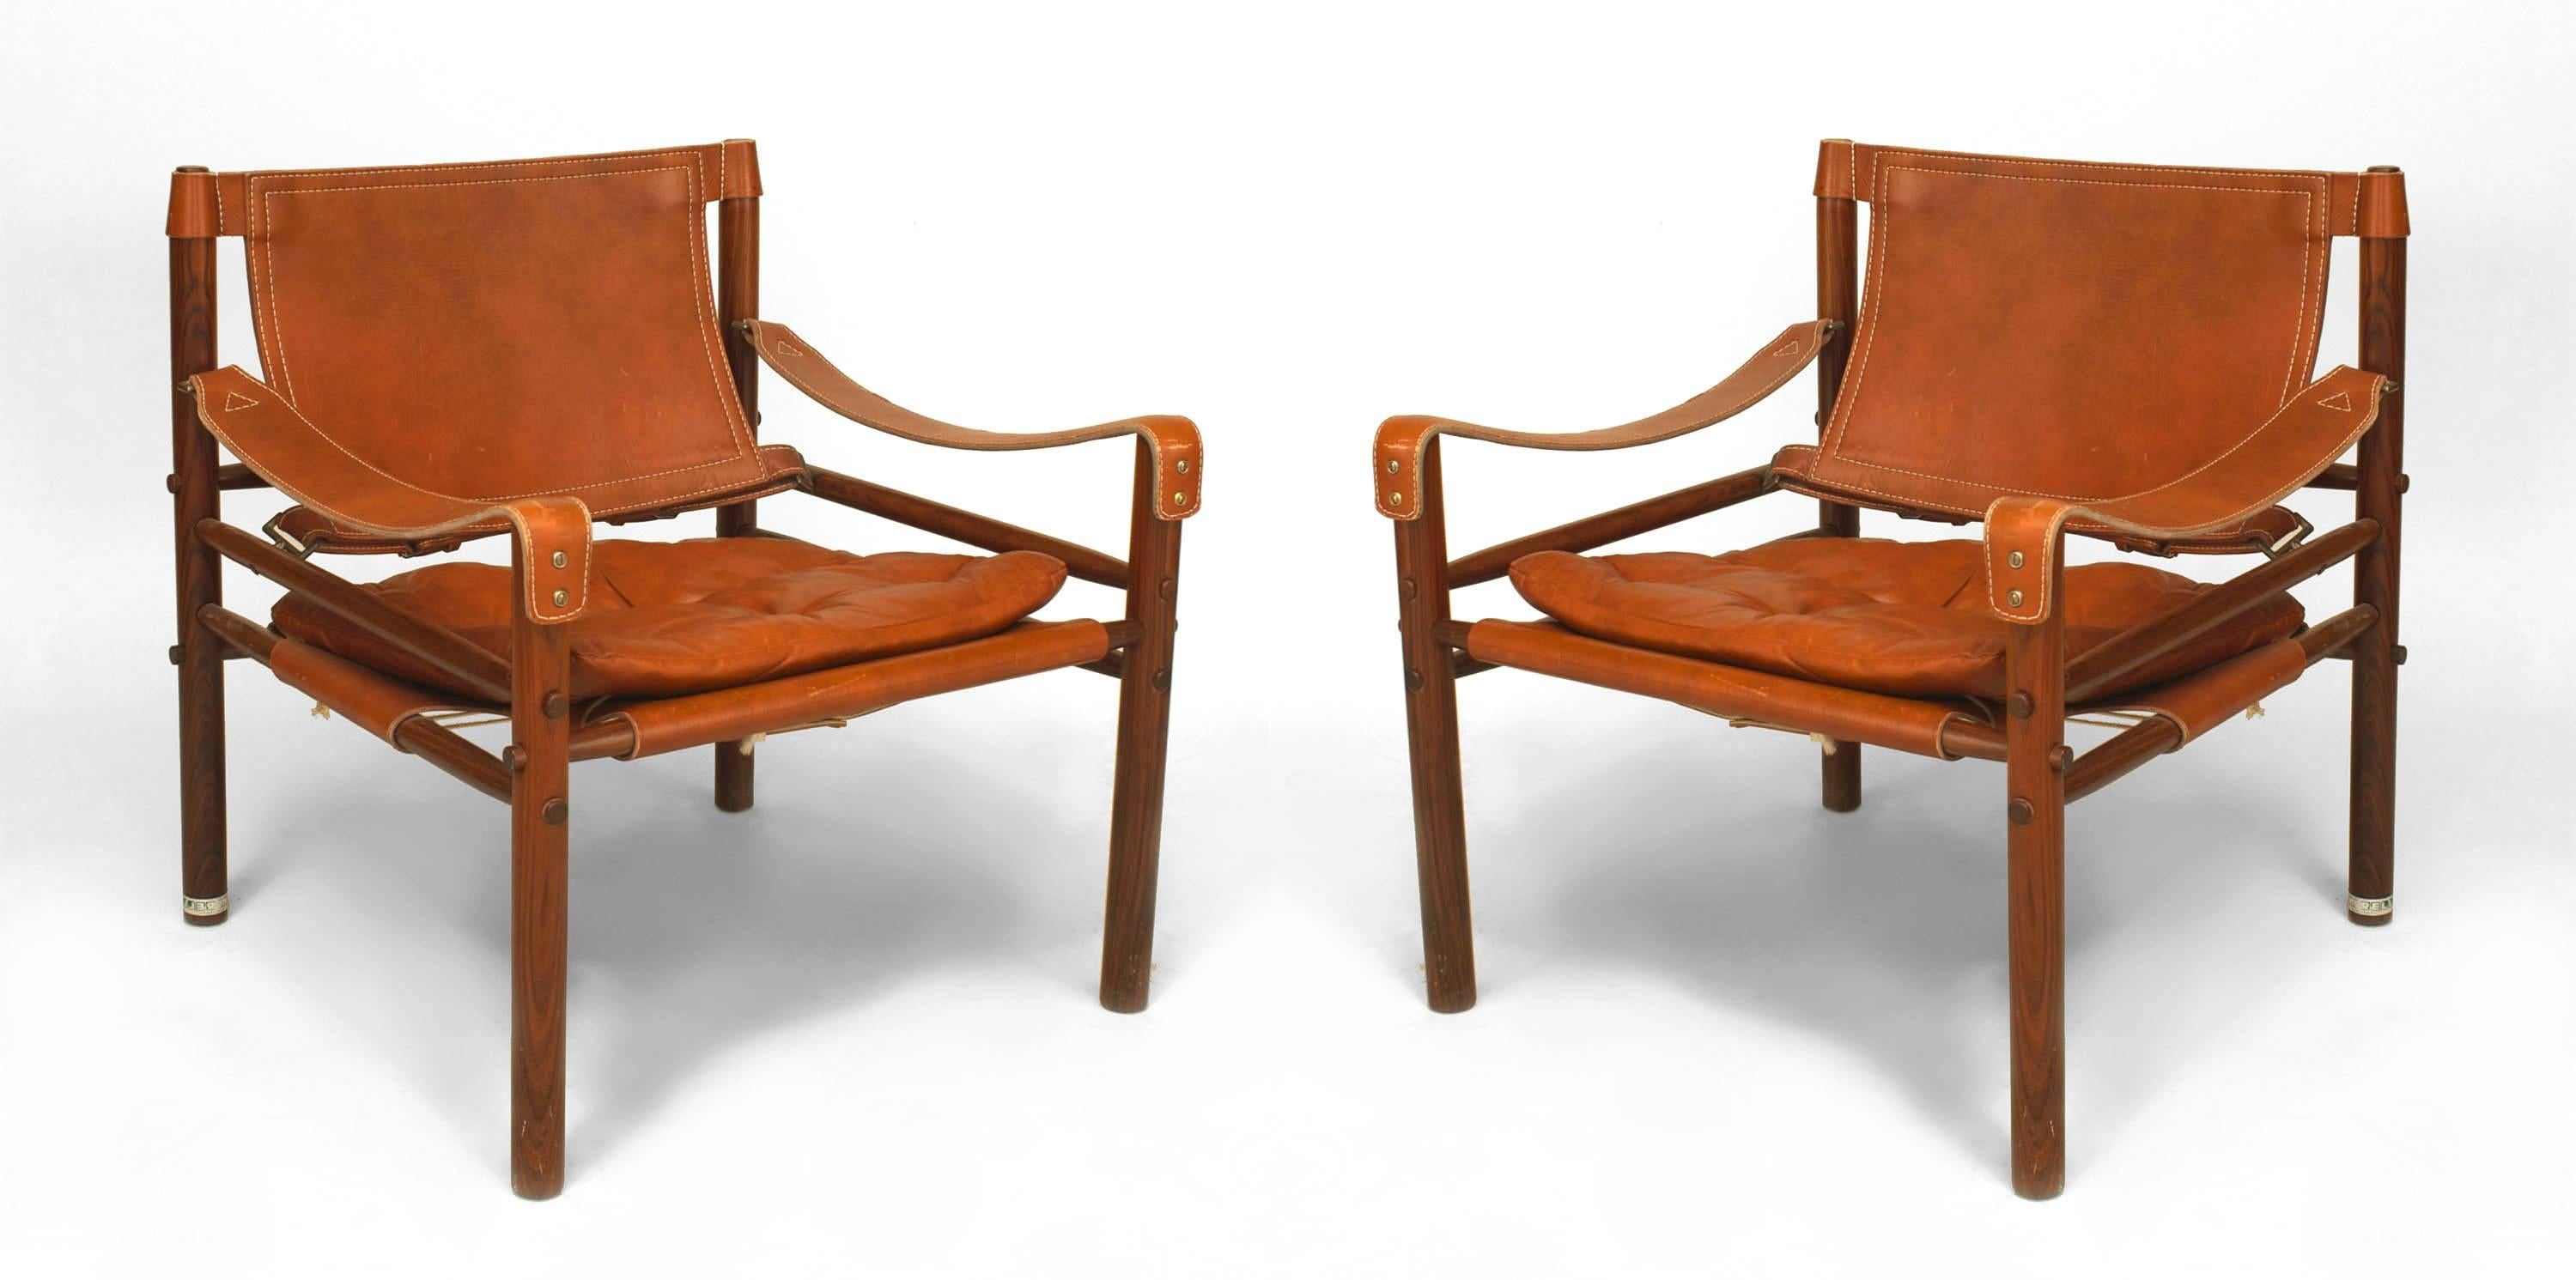 Pair of 1970's Swedish rosewood armchairs with brown leather arm rests, backs, and seats with tufted cushions and brass buckles. Labeled 